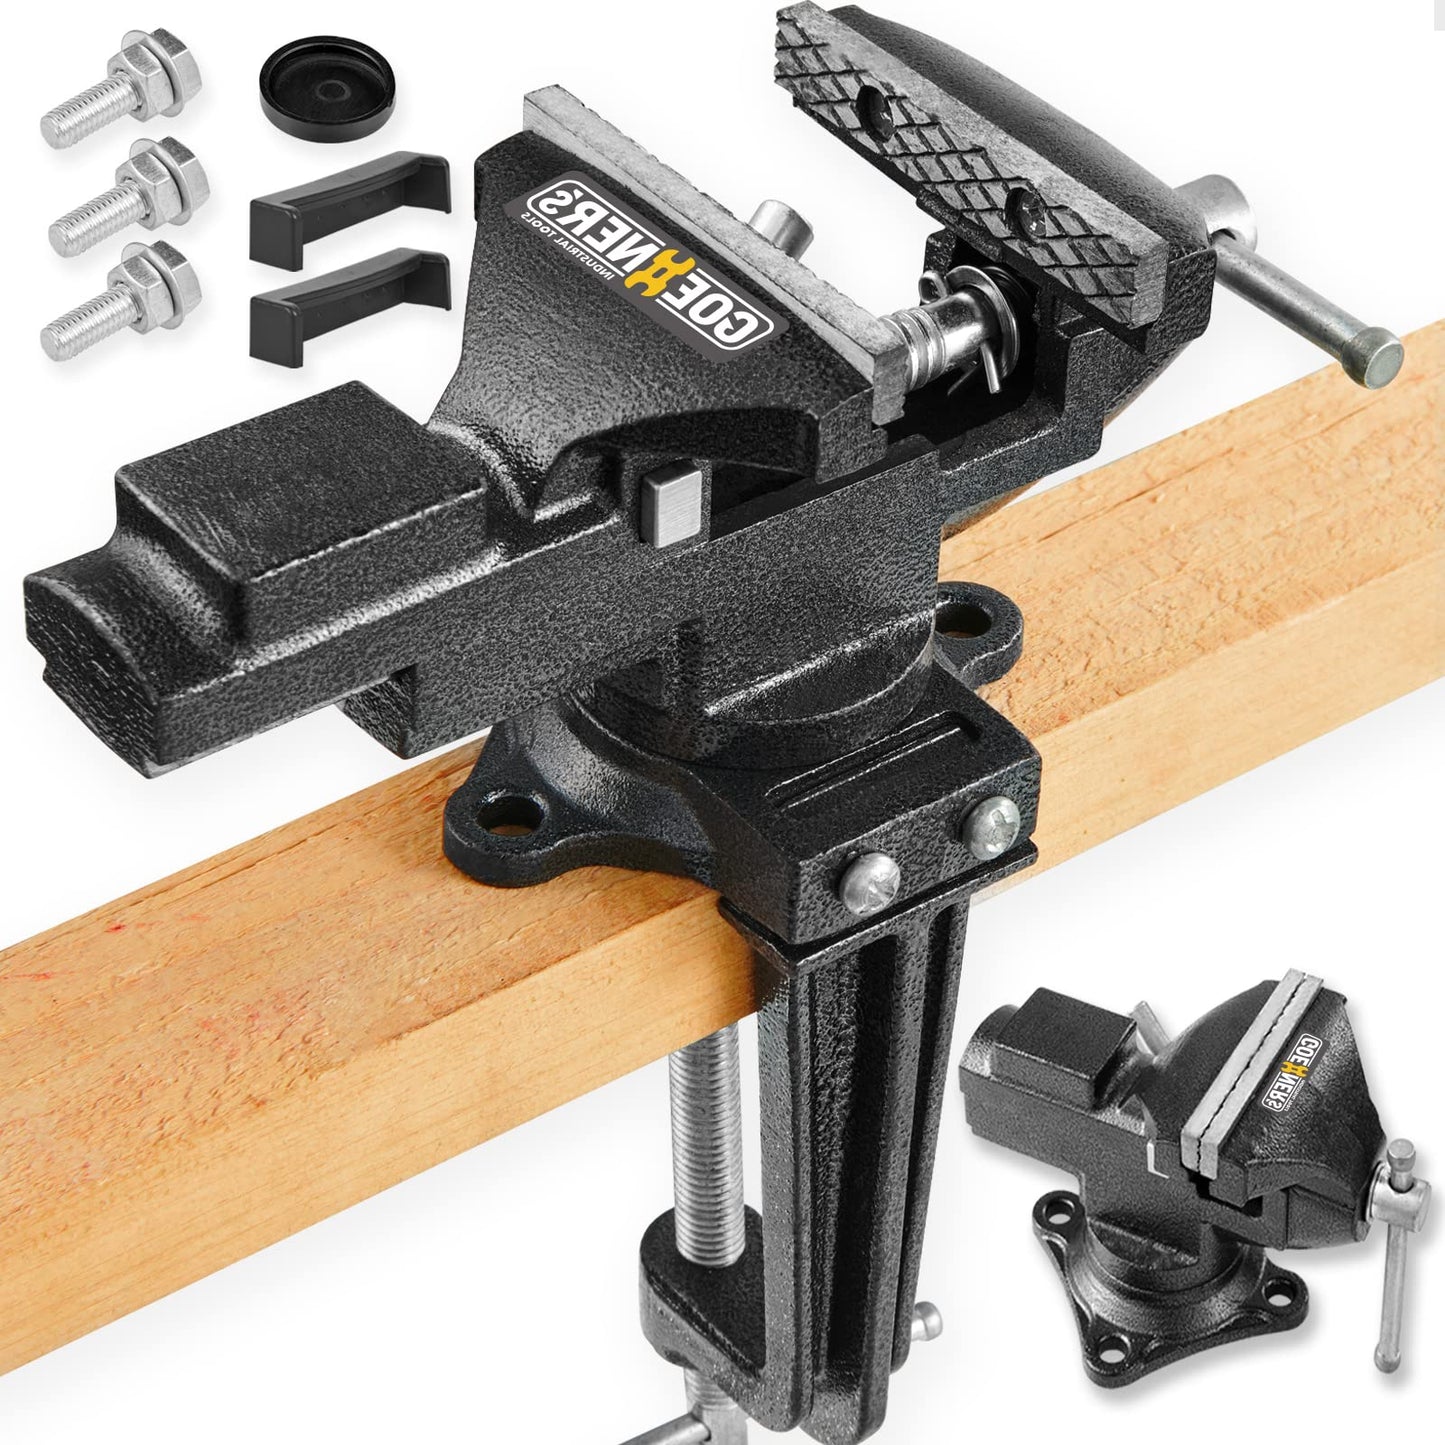 GOEHNER's Dual-Purpose Bench Vise, 3.3" Universal Home Vise With 360° Swivel Vice Base And Heavy duty Clamp-On Table Vise with Quick Adjustment for